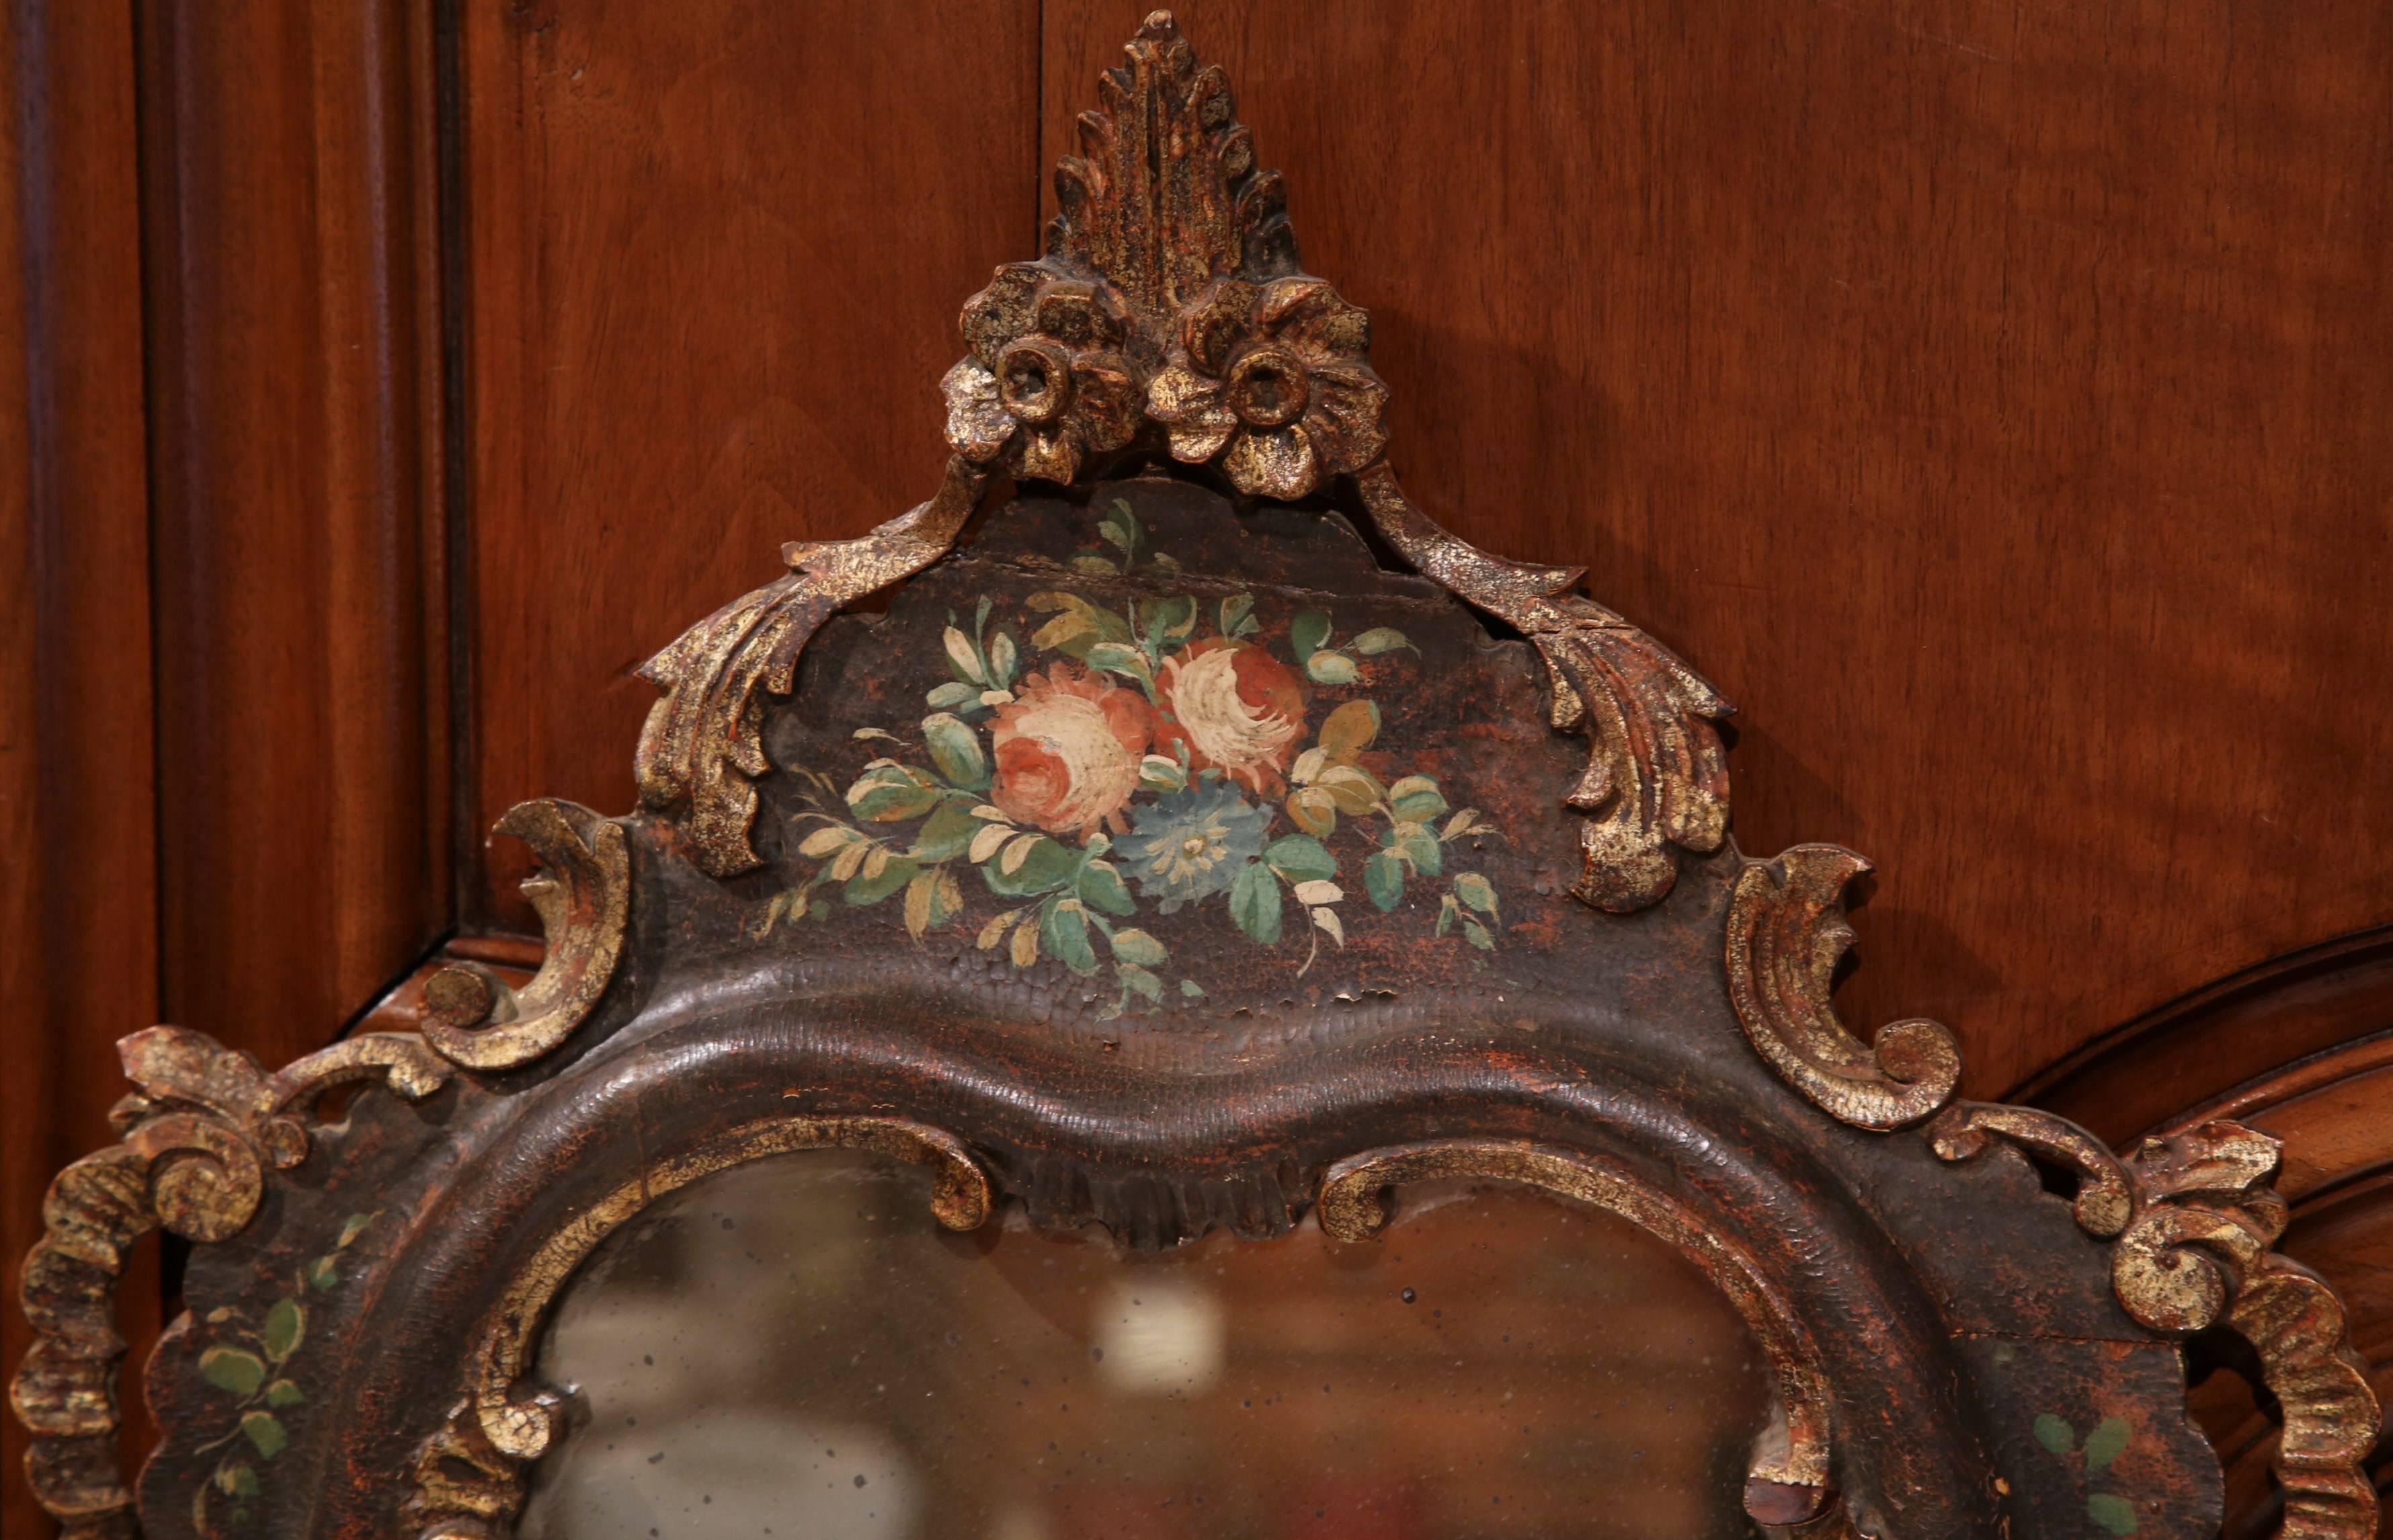 Decorate a dressing room or powder bathroom with this elegant, feminine hand-painted mirror from Italy, circa 1870. This small, colorful, nicely carved mirror features hand-painted flowers and leaves with gold leaf accent around the edges. The